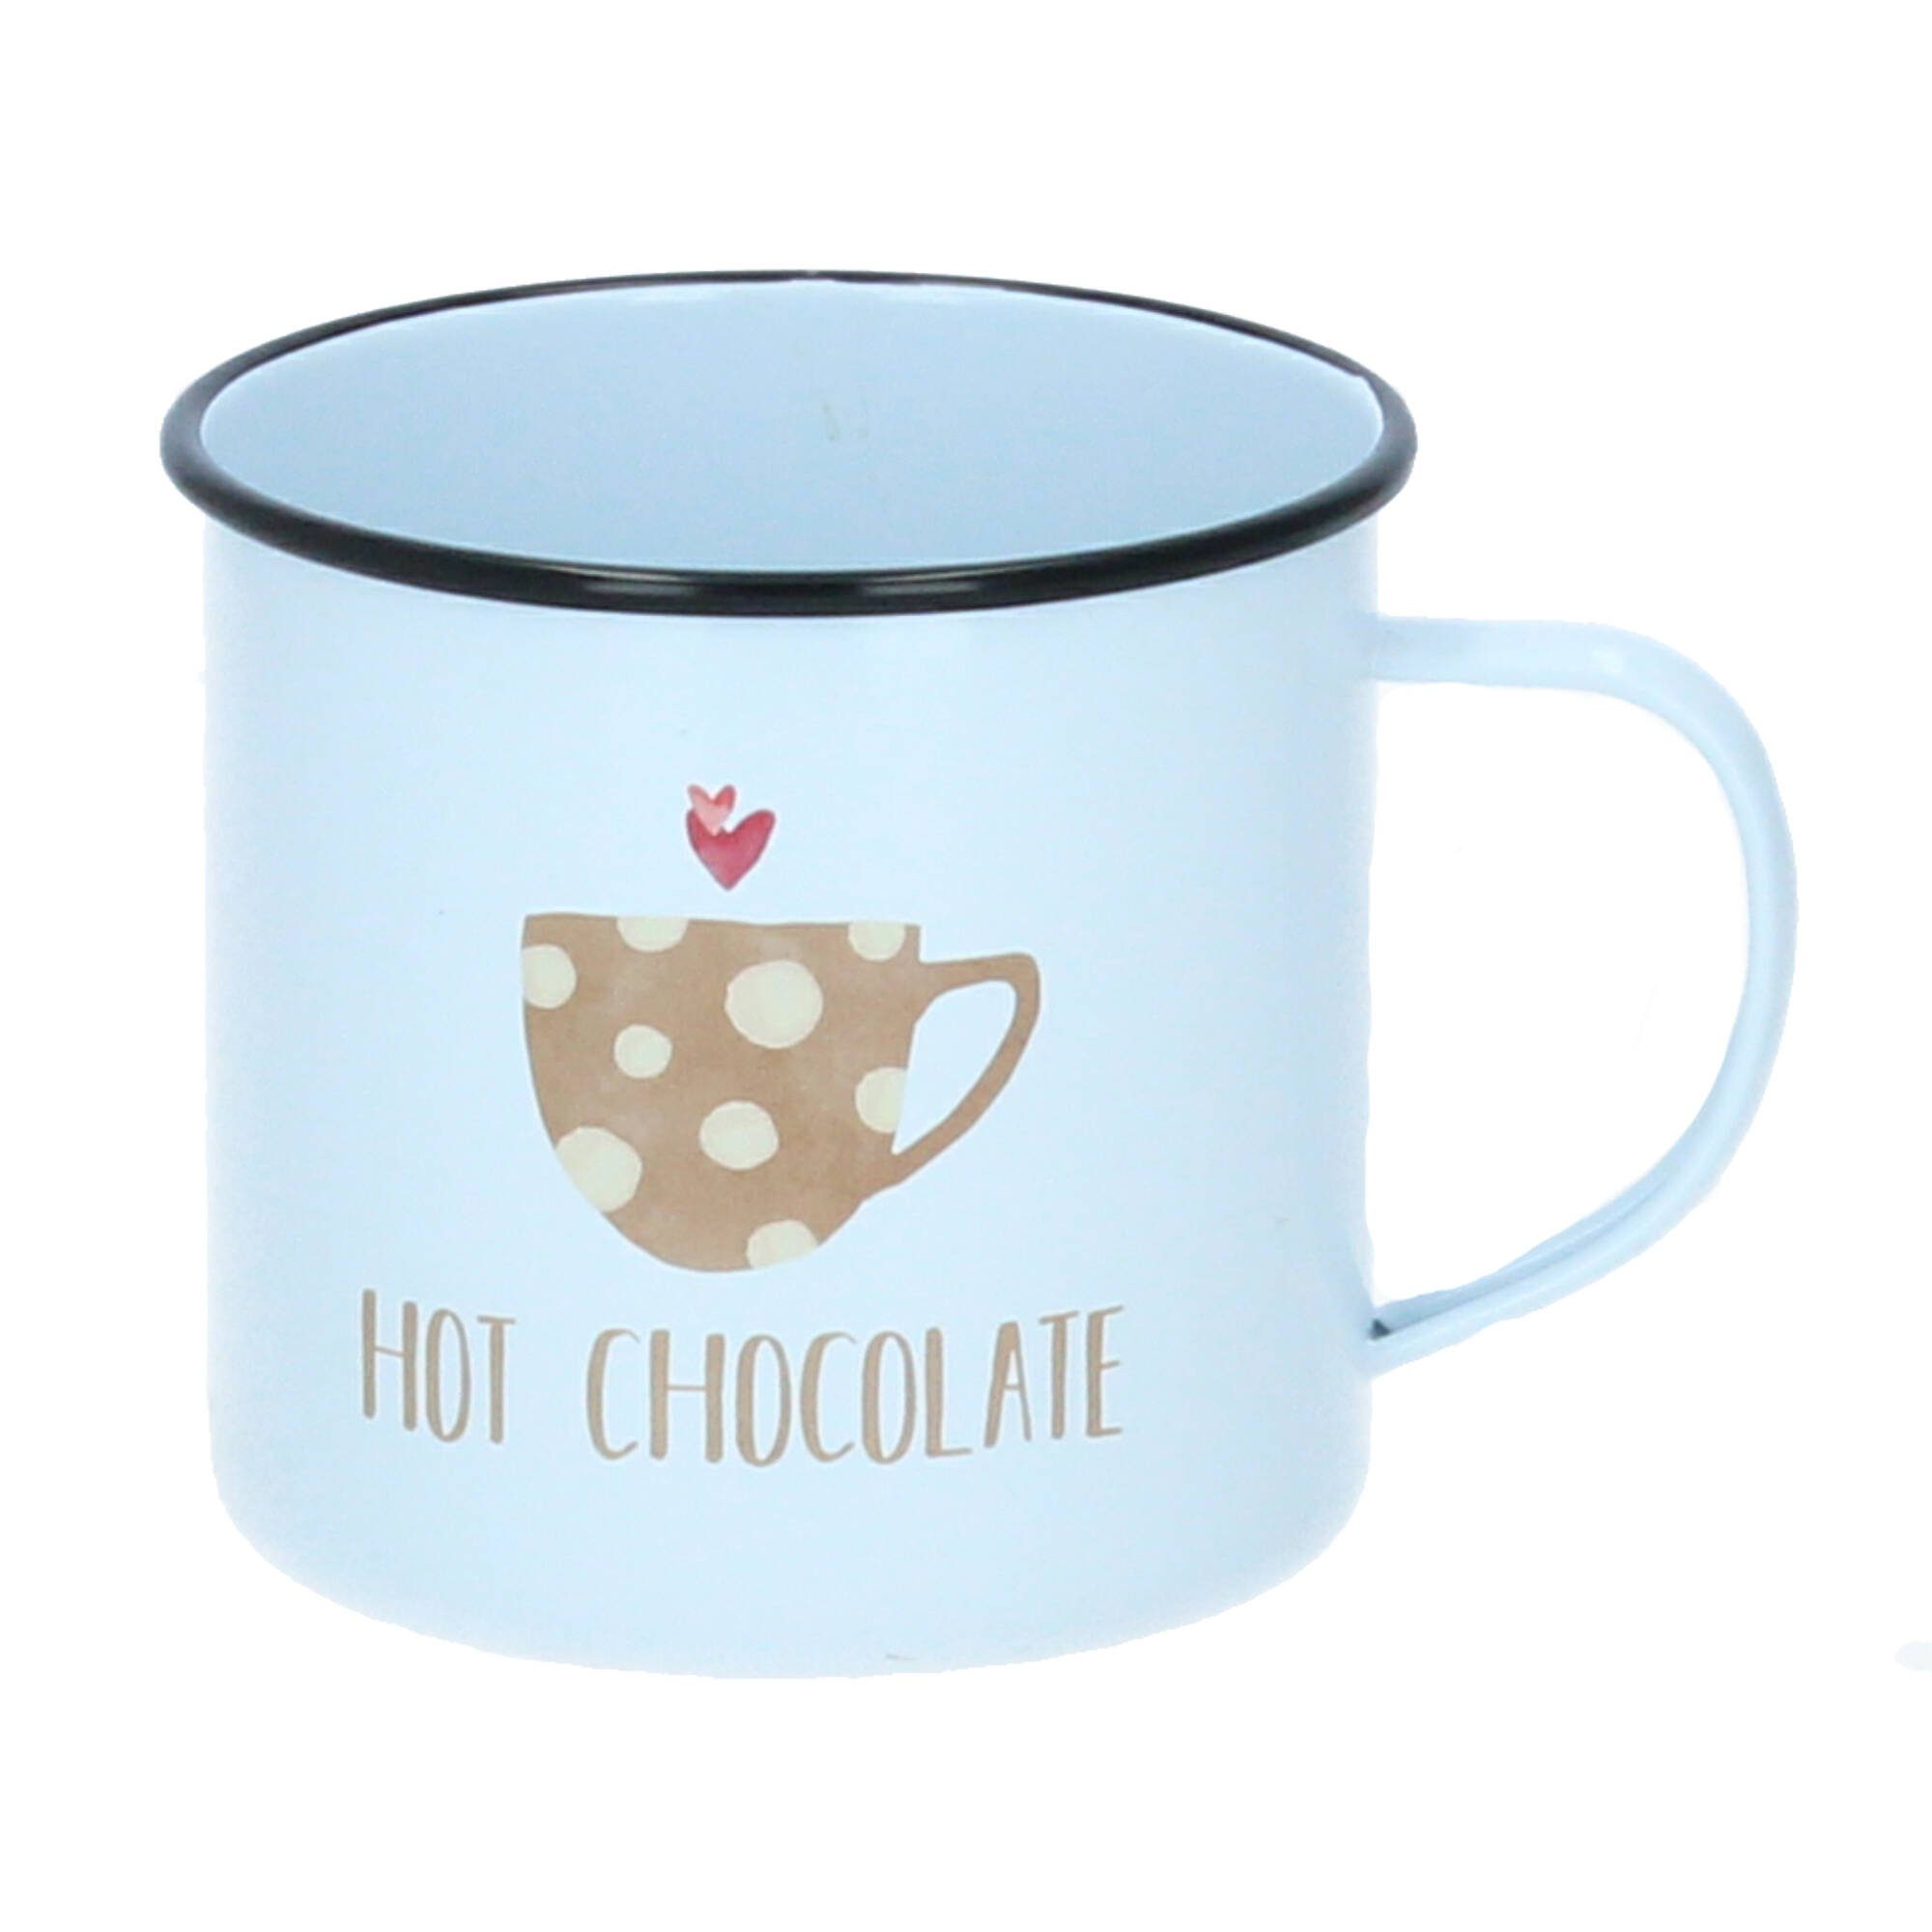 Becher metal PPD 400 Emaille ml mug happy weiß, chocolate hot